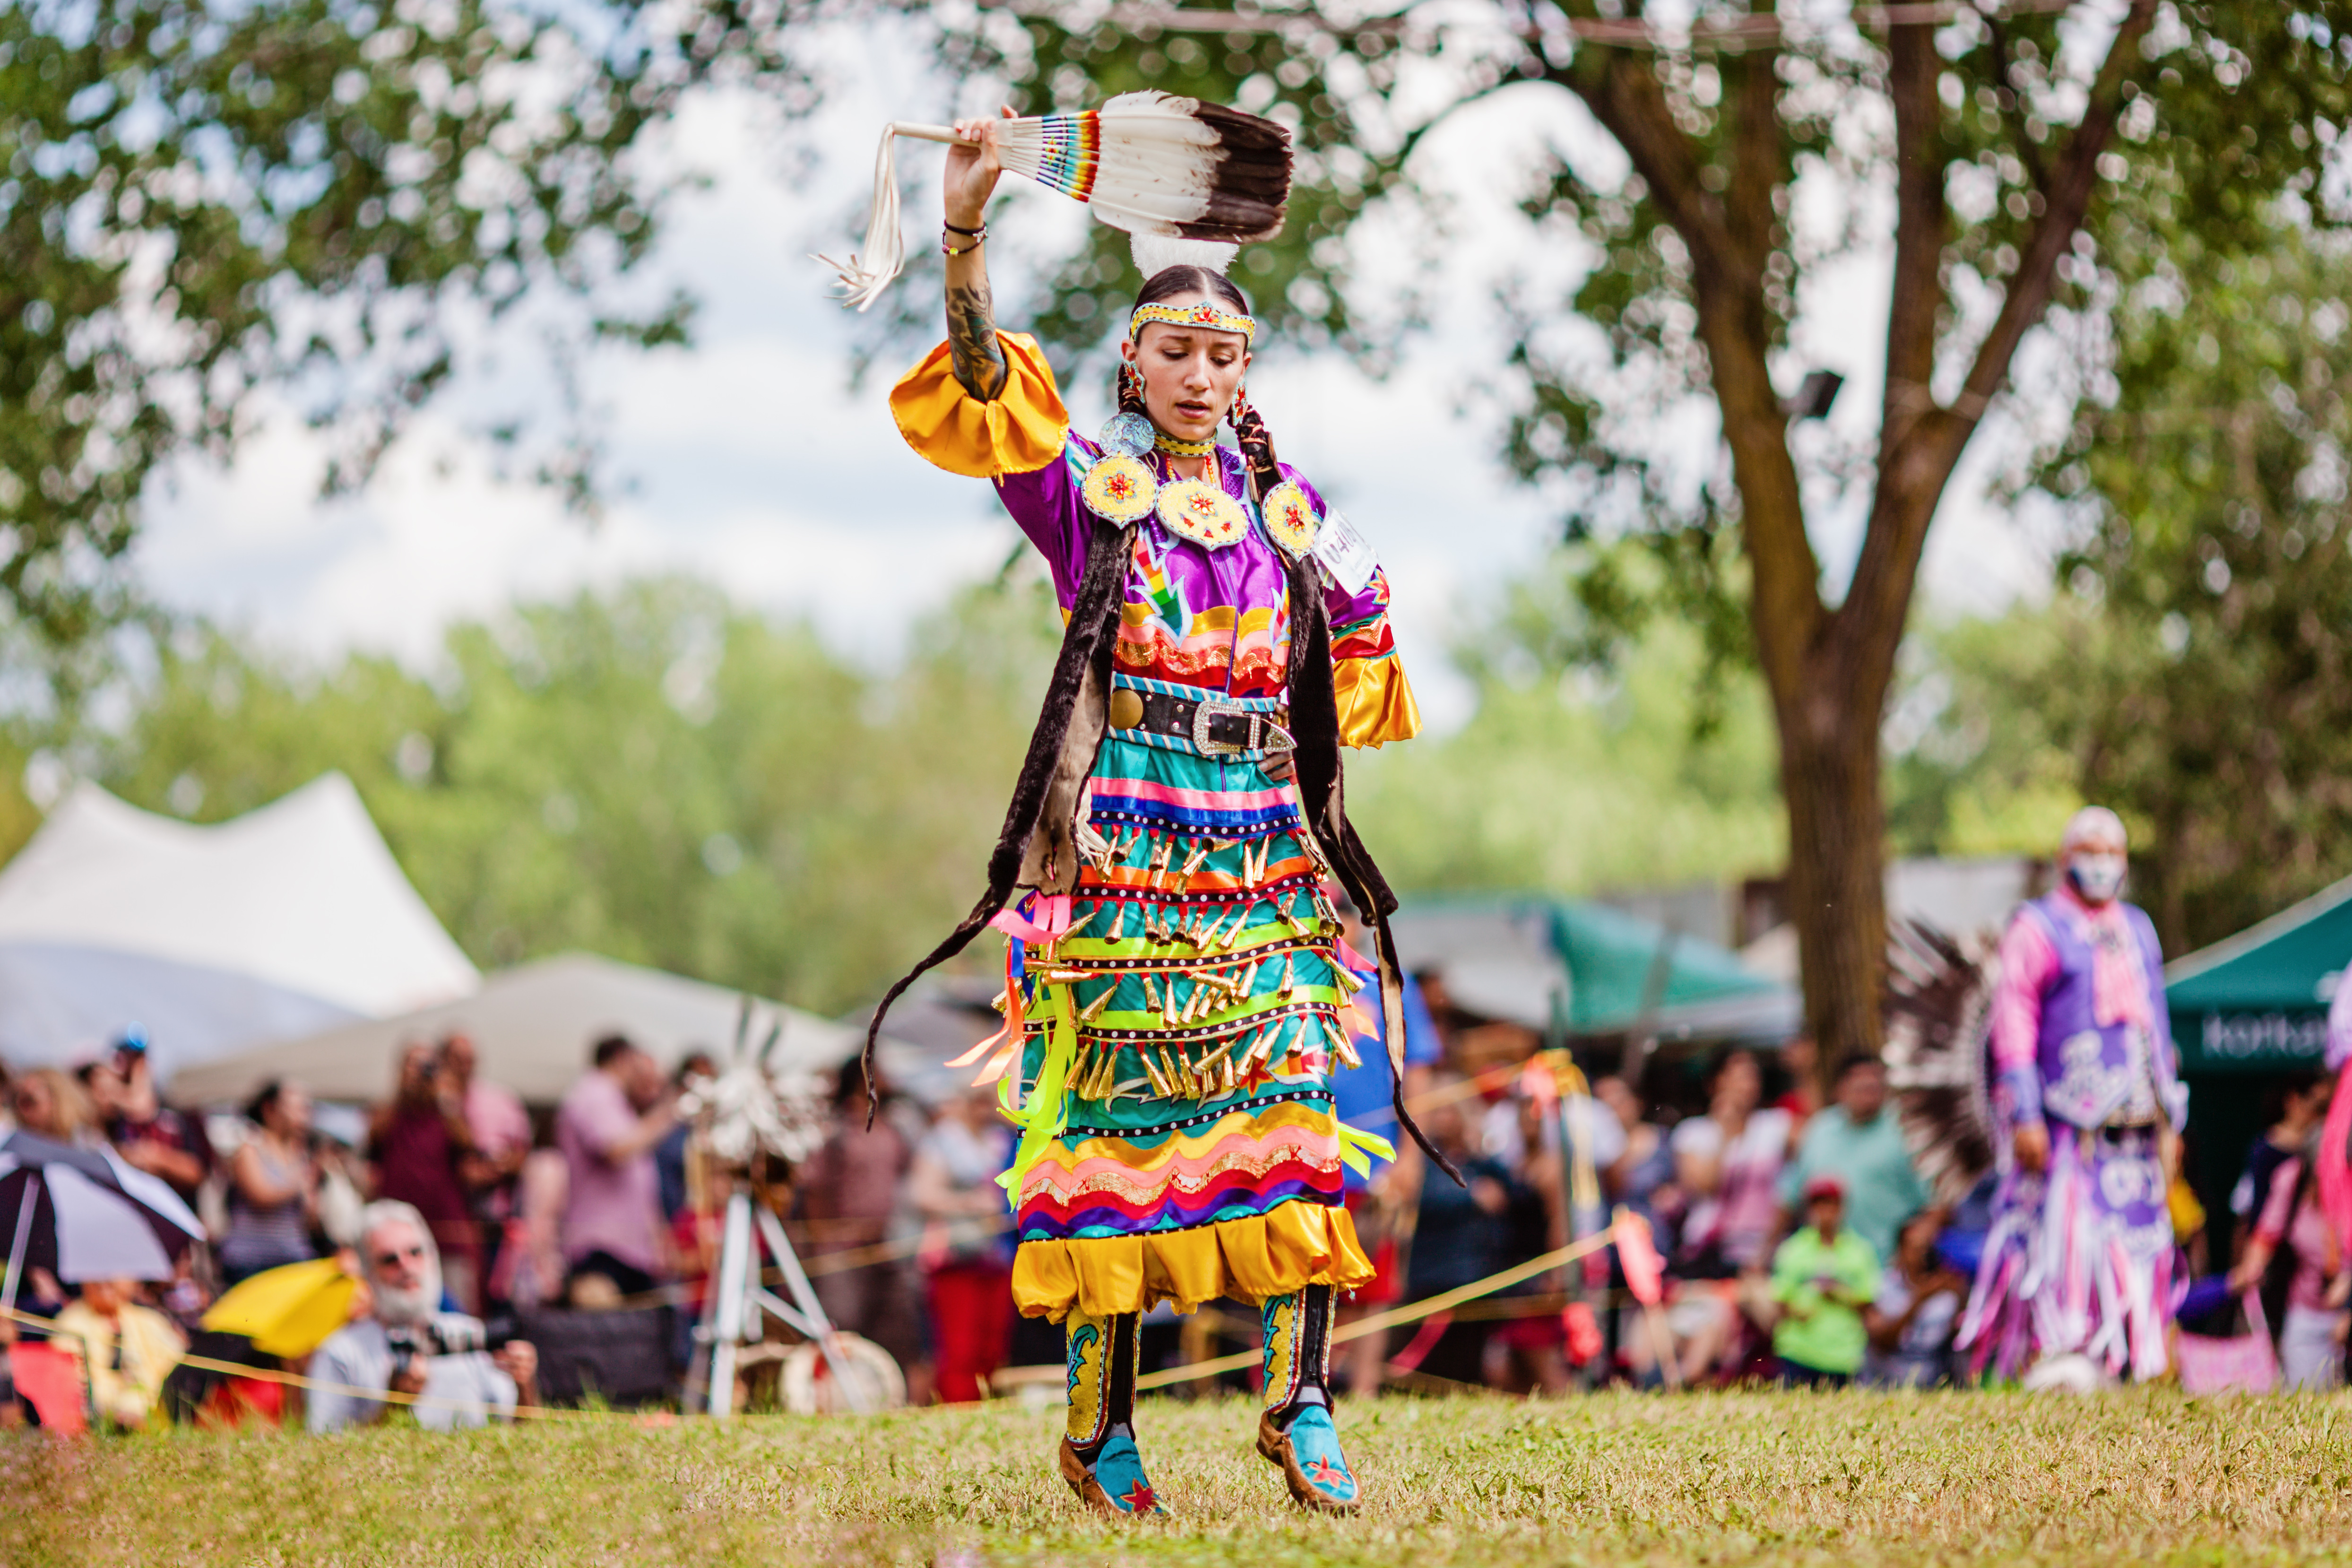 Brightly colored imagine of a jingle dress dancer performing at a Pow Wow